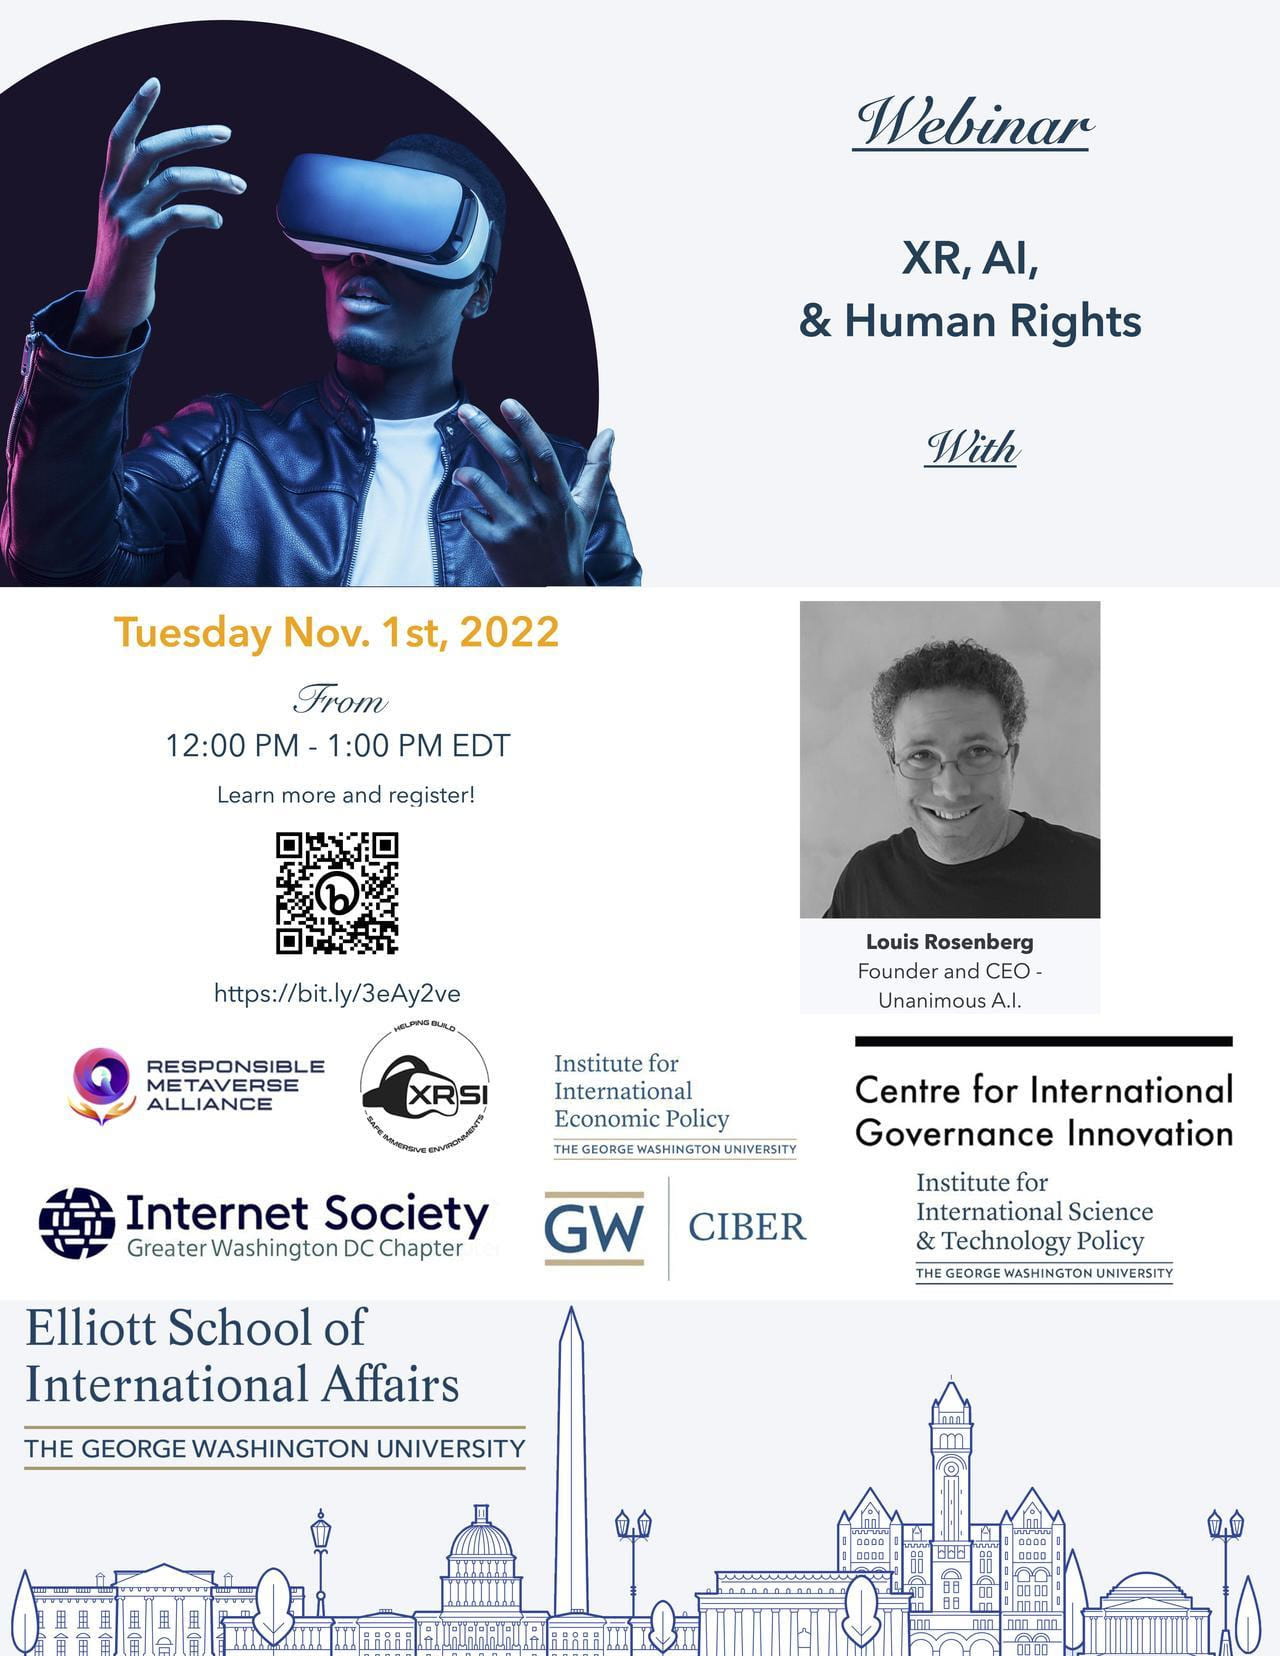 Flyer with event details: Webinar: XR. AI & Human Rights With Louis Rosenberg Founder and CEO Unanimous A.I. Tuesday Nov. 1st, 2022 from 12pm to 1pm EDT. Co-sponsors include: Responsible Metaverse Alliance, XRSI, Institute for International Economic Policy at GWU, Center for International Governance Innovation, Internet Society Greater Washington DC Chapter, GW CIBER, Institute for International Science and Technology Policy at GW